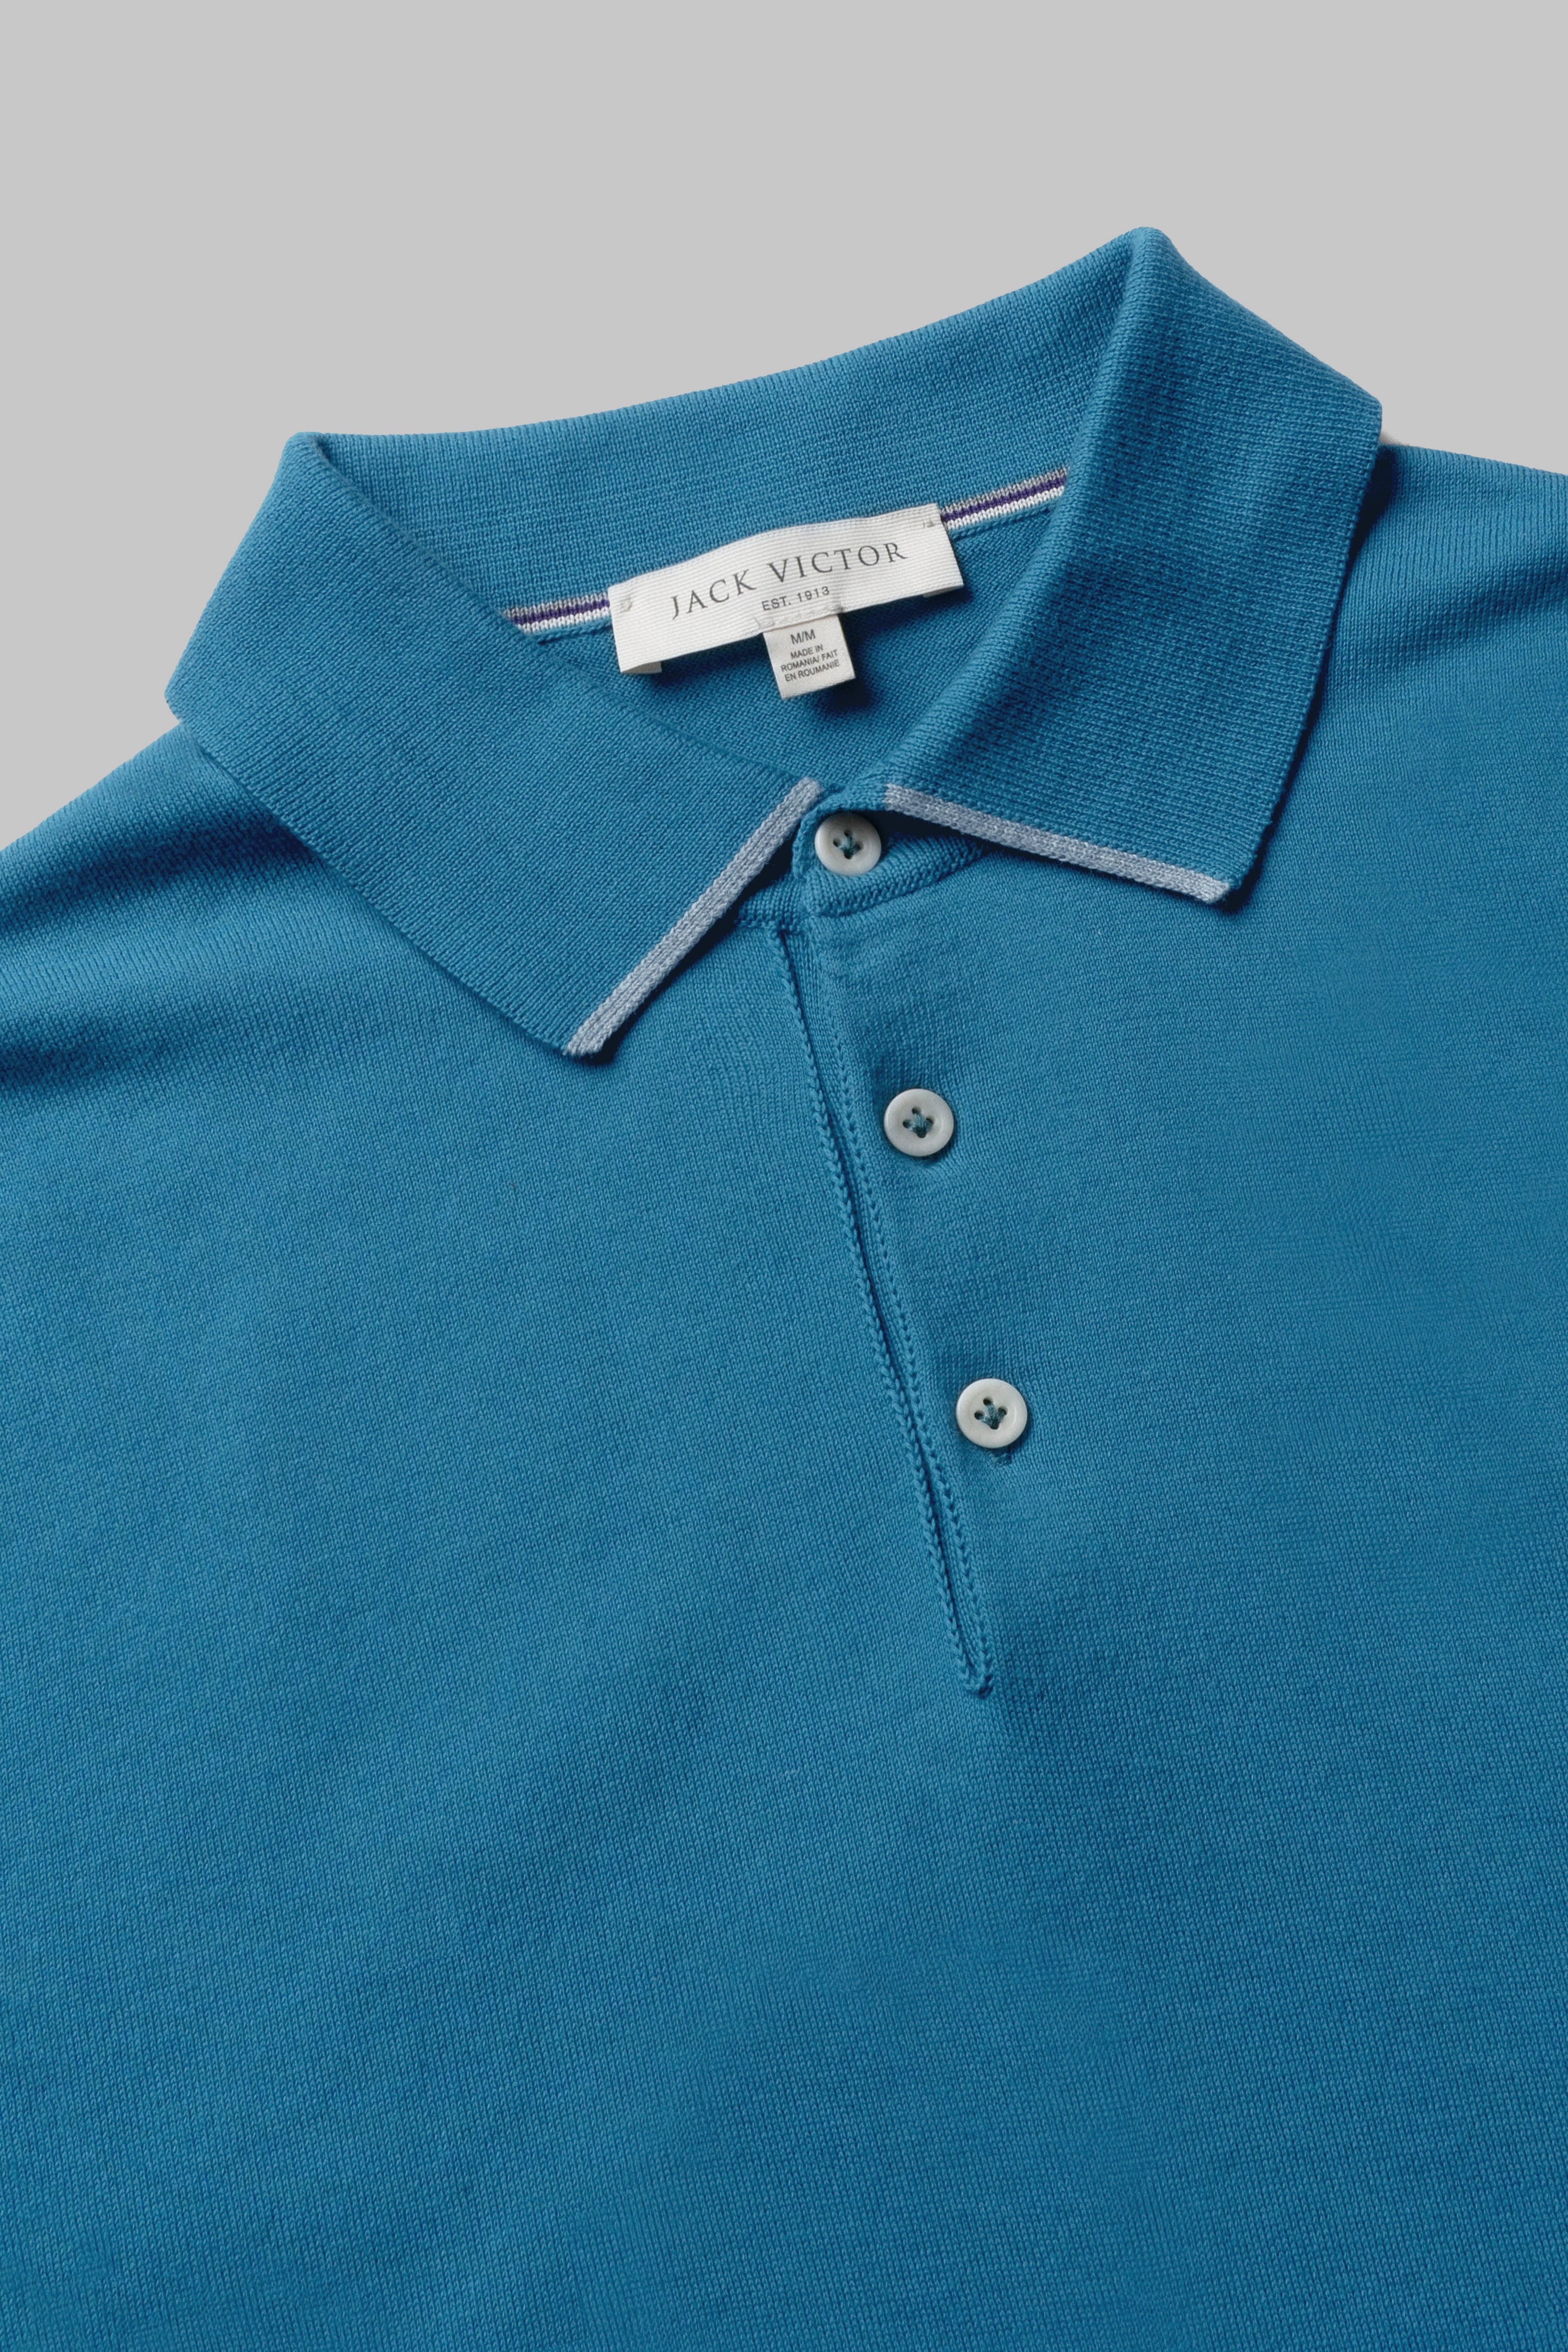 Alt view 1 Roslyn Cotton Knit Polo in Teal